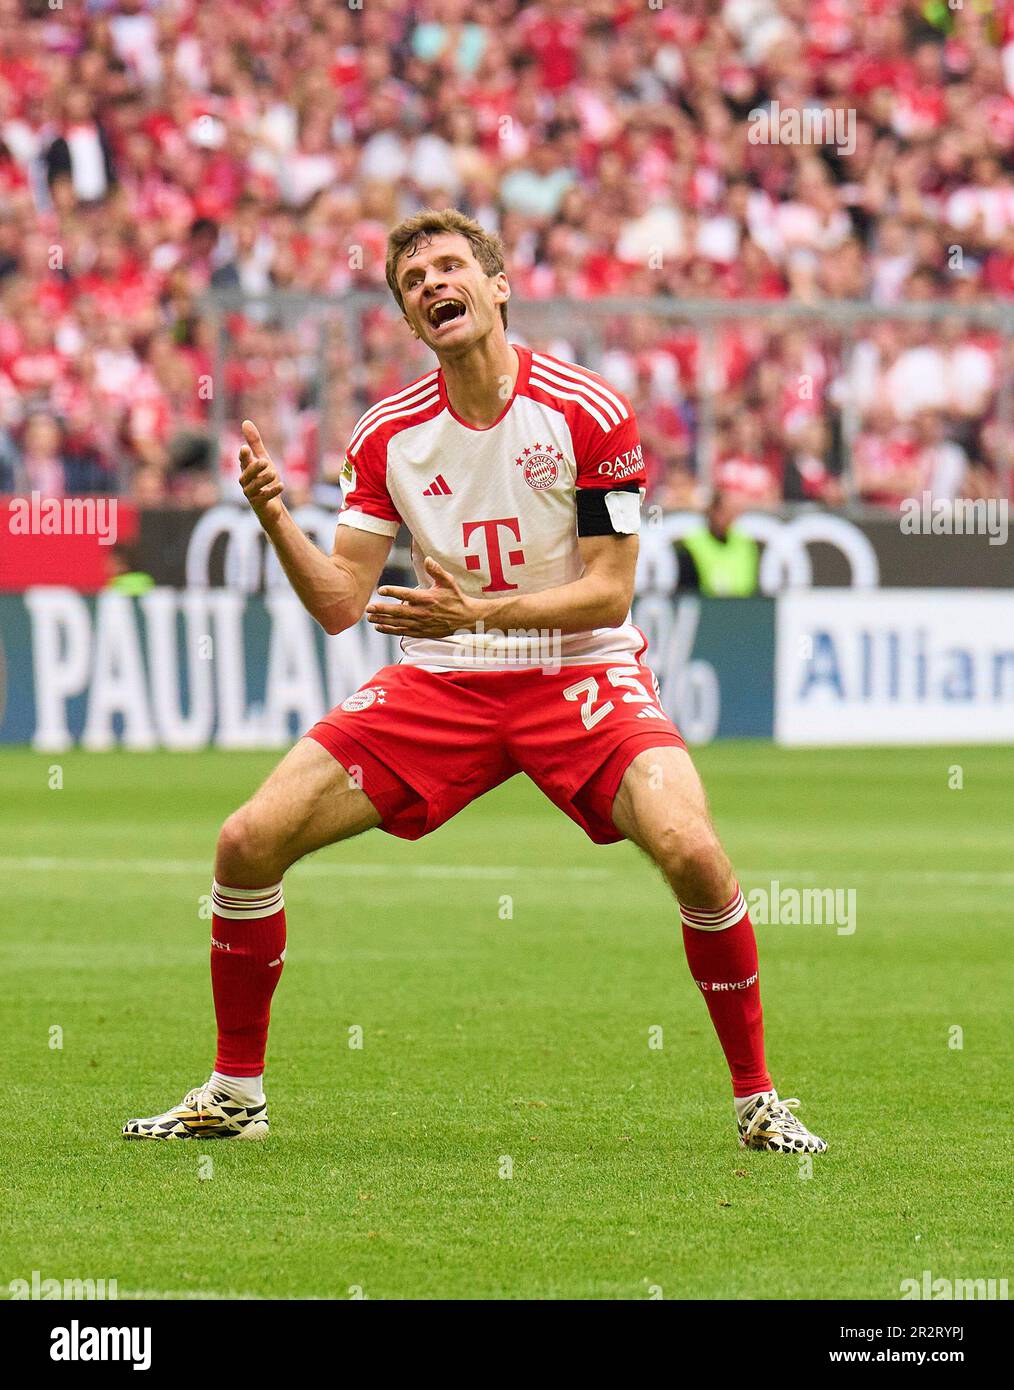 Thomas MUELLER, MÜLLER, FCB 25  in the match FC BAYERN MUENCHEN - RB LEIPZIG 1.German Football League on May 20, 2023 in Munich, Germany. Season 2022/2023, matchday 33, 1.Bundesliga, FCB, München, 33.Spieltag. © Peter Schatz / Alamy Live News    - DFL REGULATIONS PROHIBIT ANY USE OF PHOTOGRAPHS as IMAGE SEQUENCES and/or QUASI-VIDEO - Stock Photo